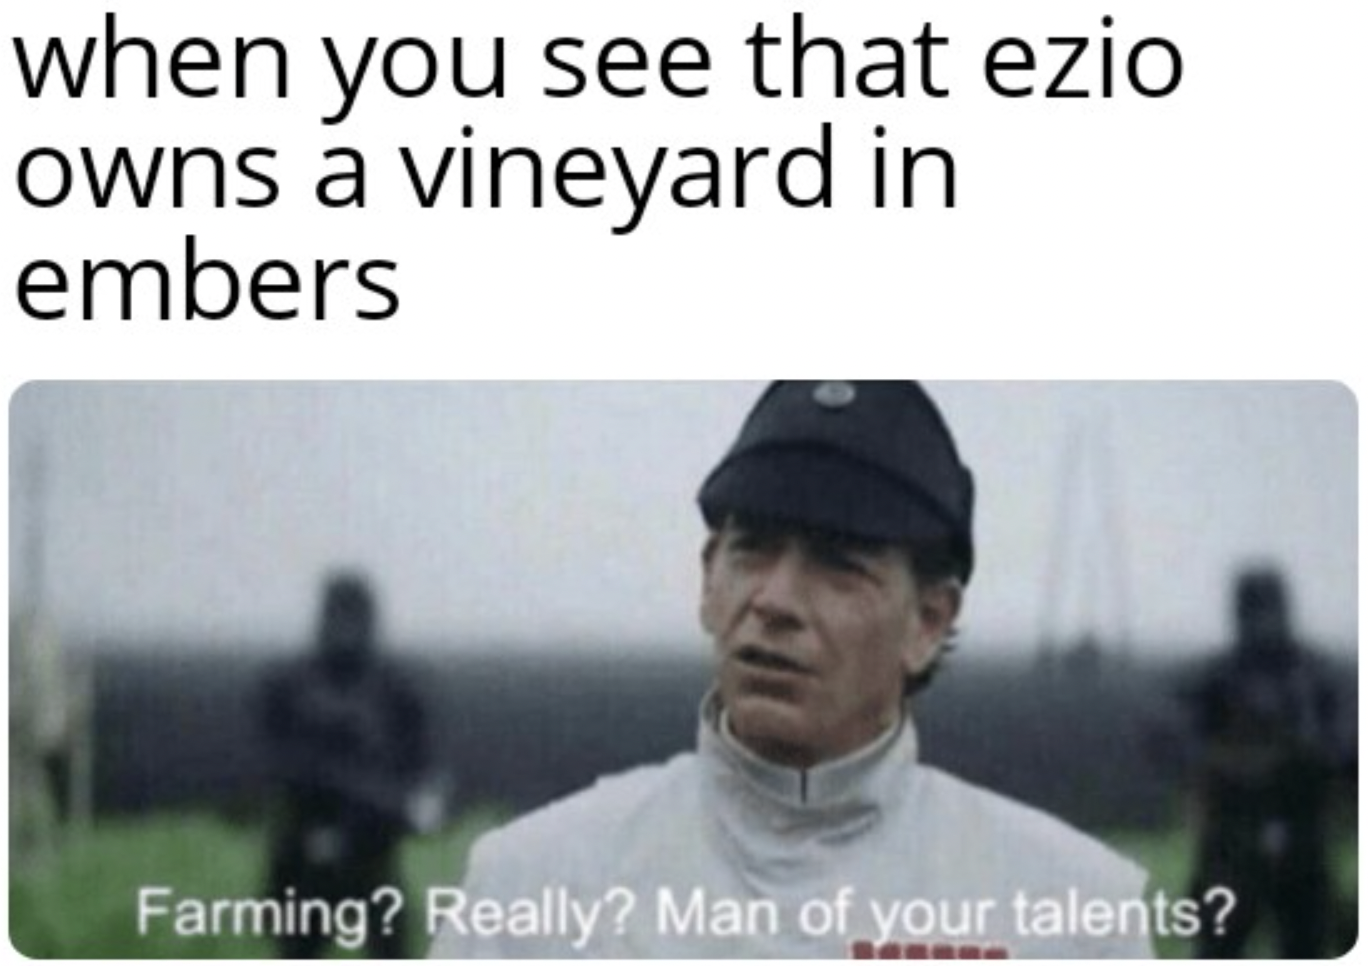 Assassin's Creed Memes - photo caption - when you see that ezio owns vineyard in embers Farming? Really? Man of your talents?